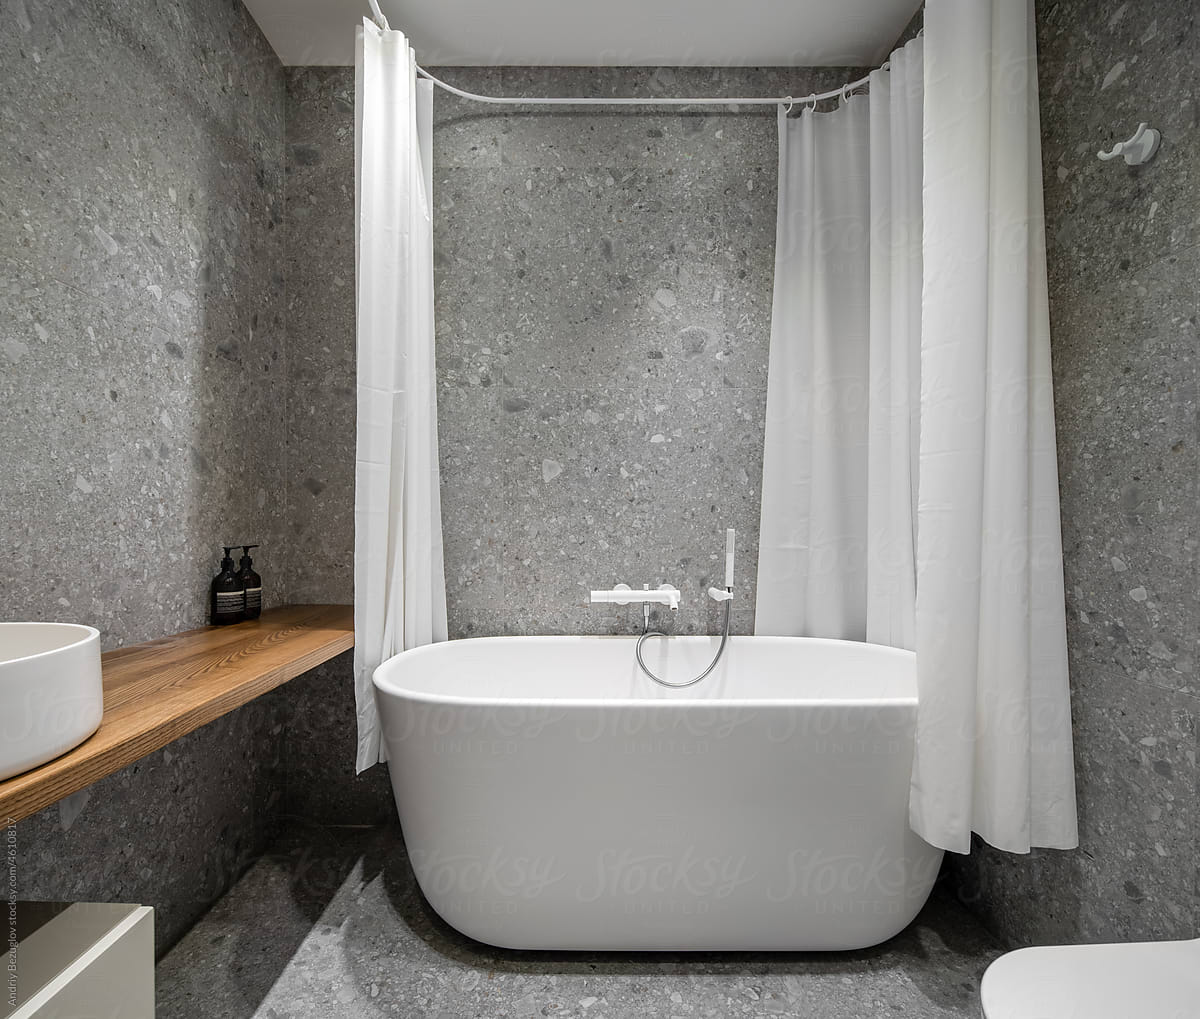 Bathroom in contemporary style with tiled walls